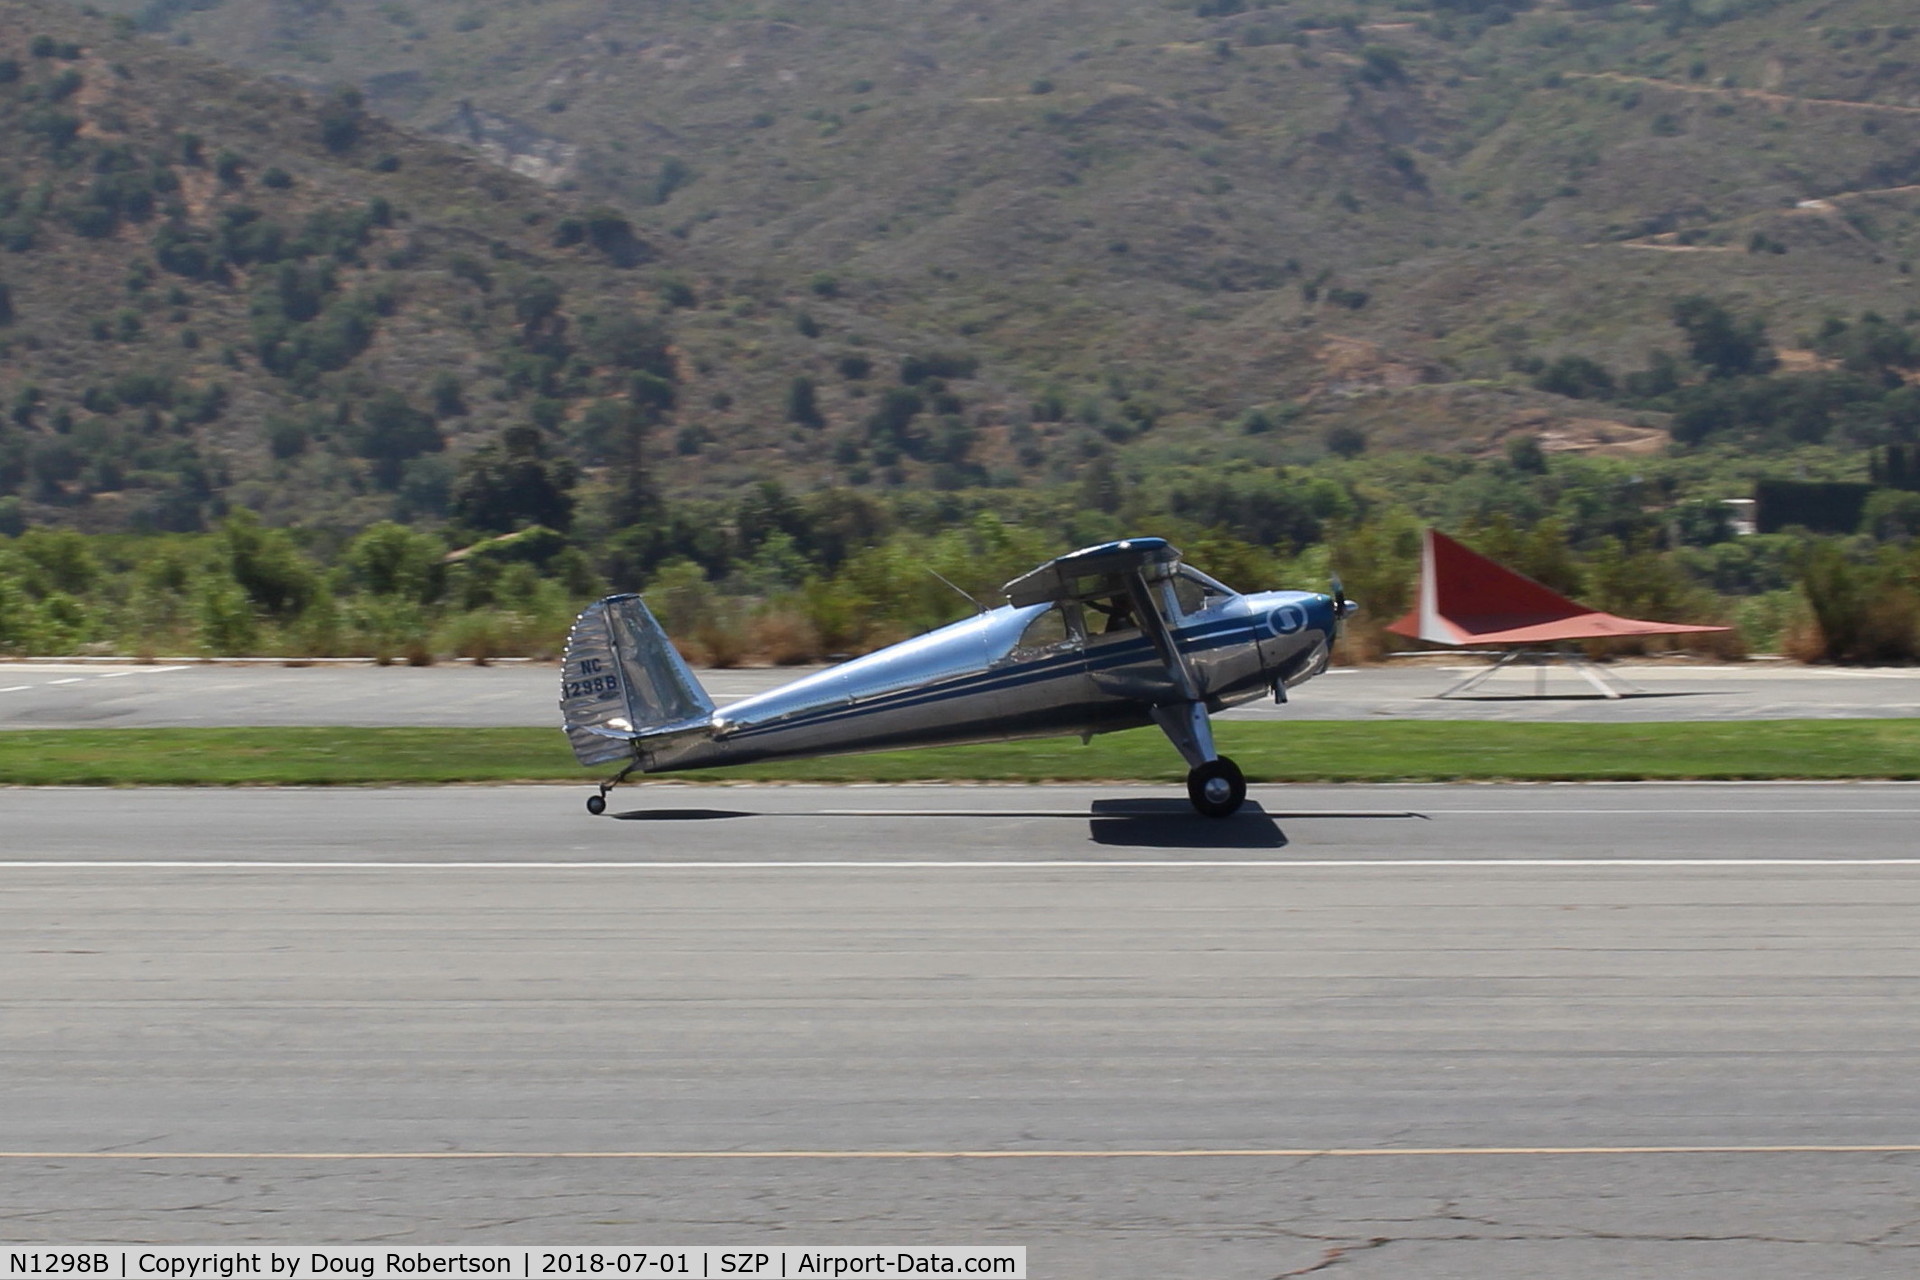 N1298B, 1947 Luscombe 8E Silvaire C/N 5925, 1947 Luscombe 8E SILVAIRE, Continental C85 85 Hp, landing roll Rwy 22